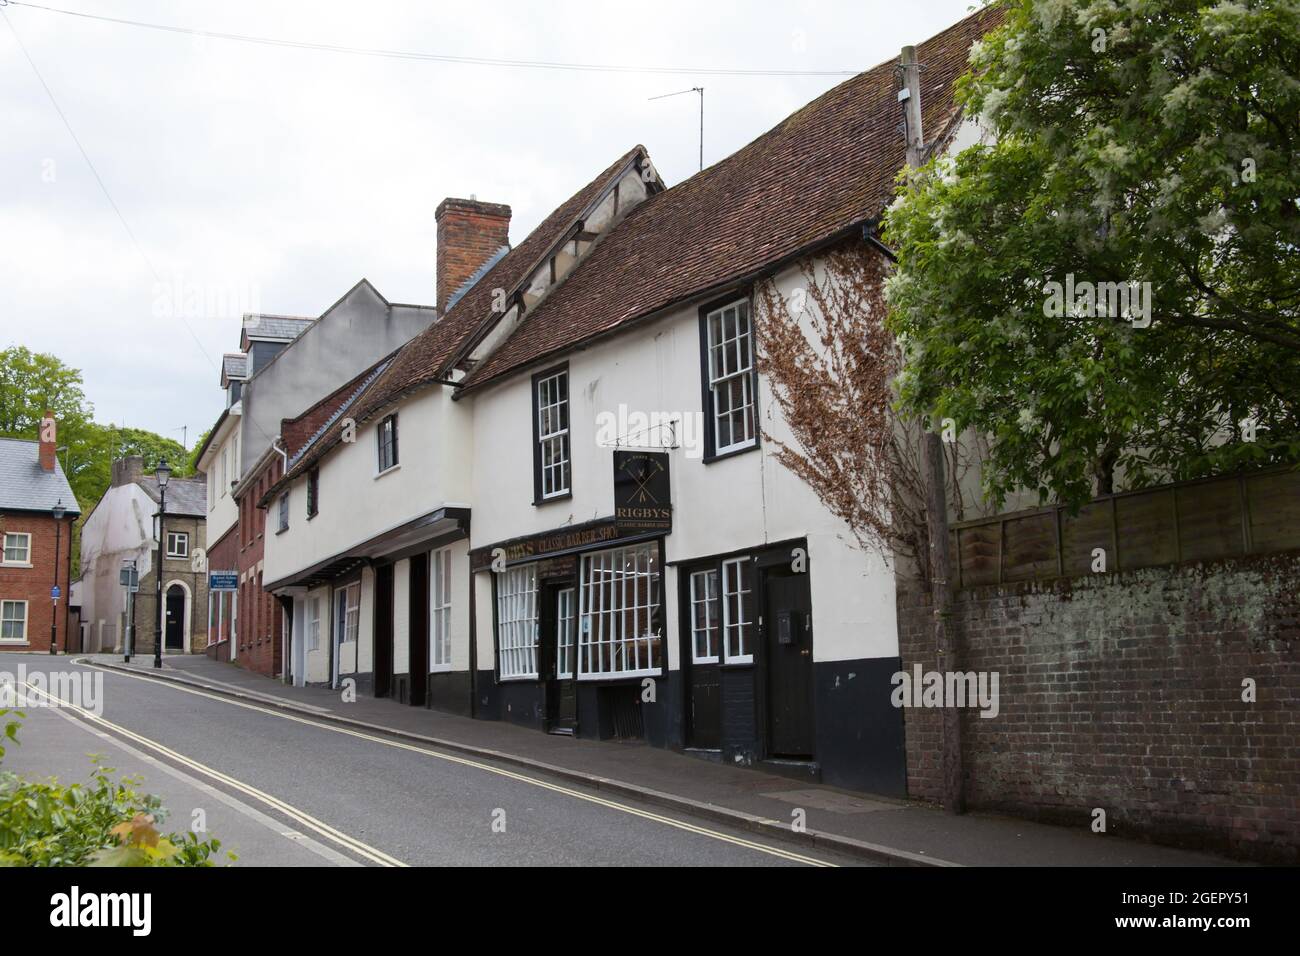 Views of Chantry Street in Andover, Hampshire in the UK Stock Photo